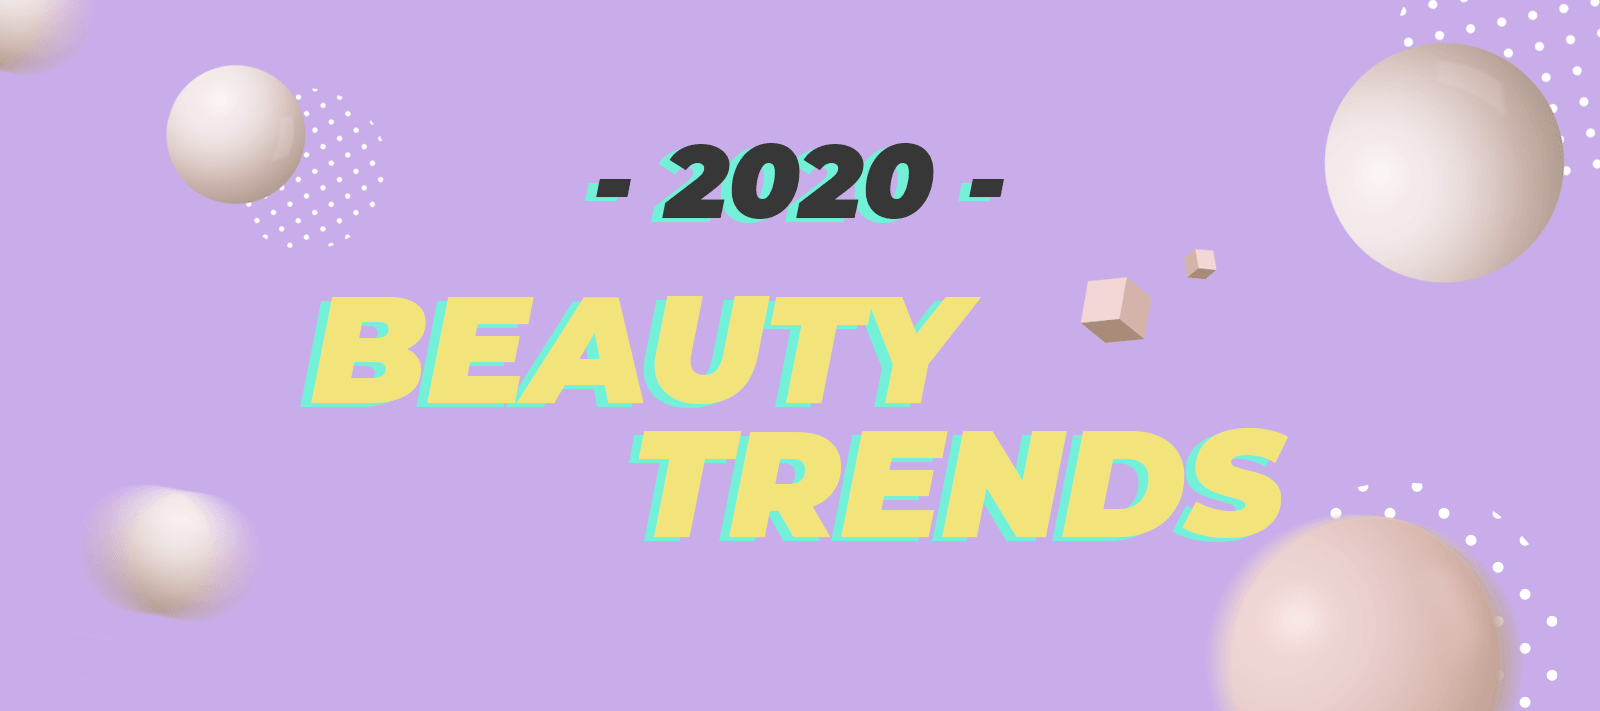 Top Beauty Trends of 2020 - Vitamasques